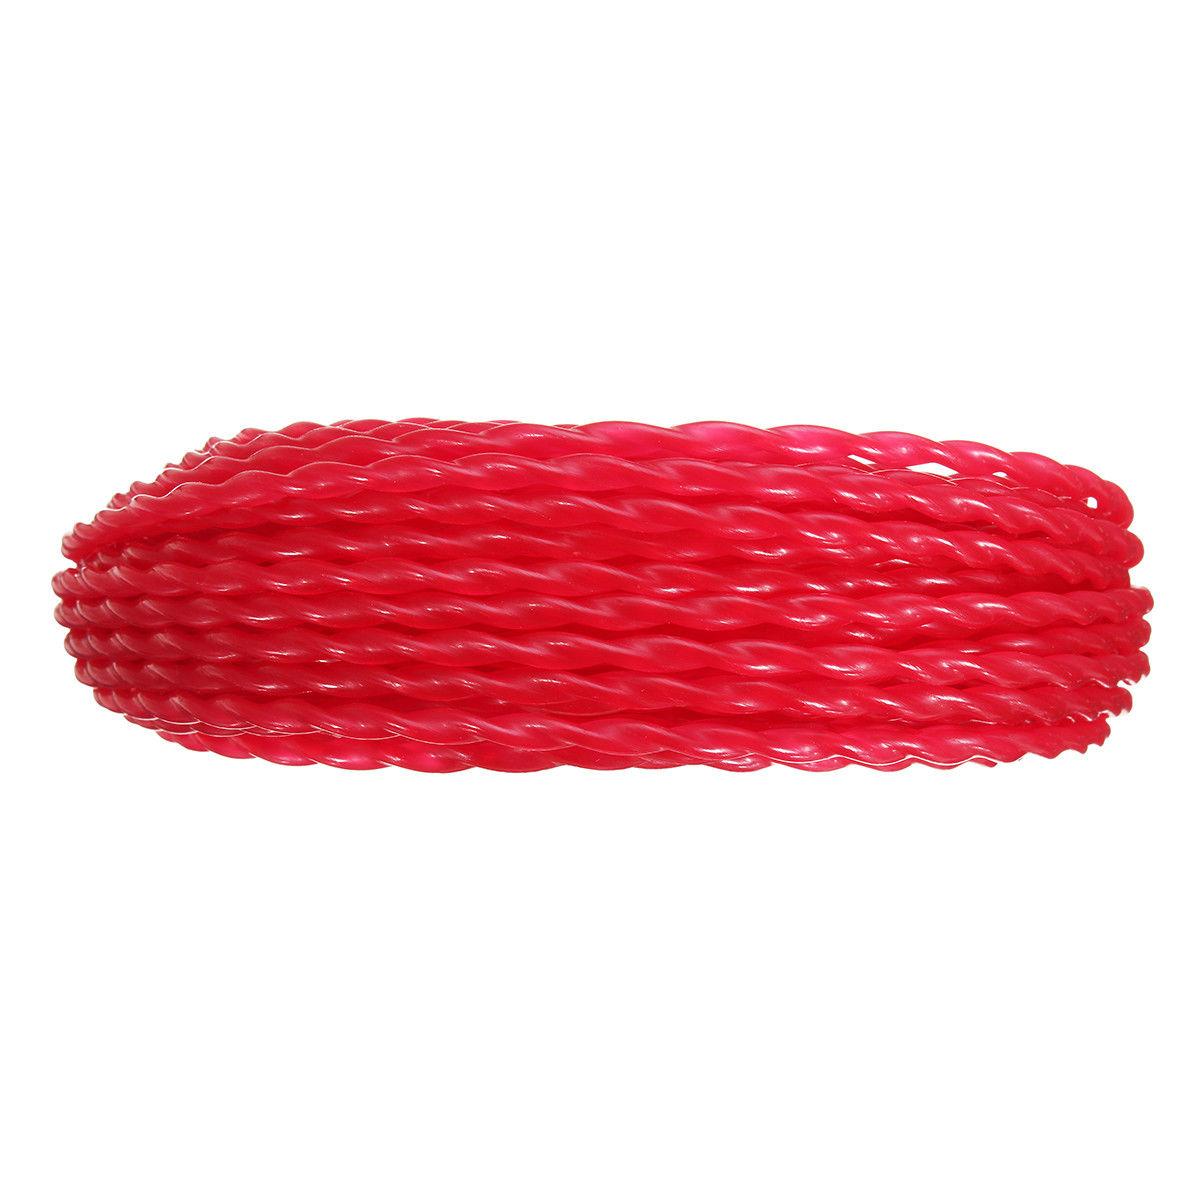 Nylon 15m*3mm Trimmer Line Rope Roll Cord Wire String Grass Strimmer Garden Mowing Wire Lawn Mower Accessory